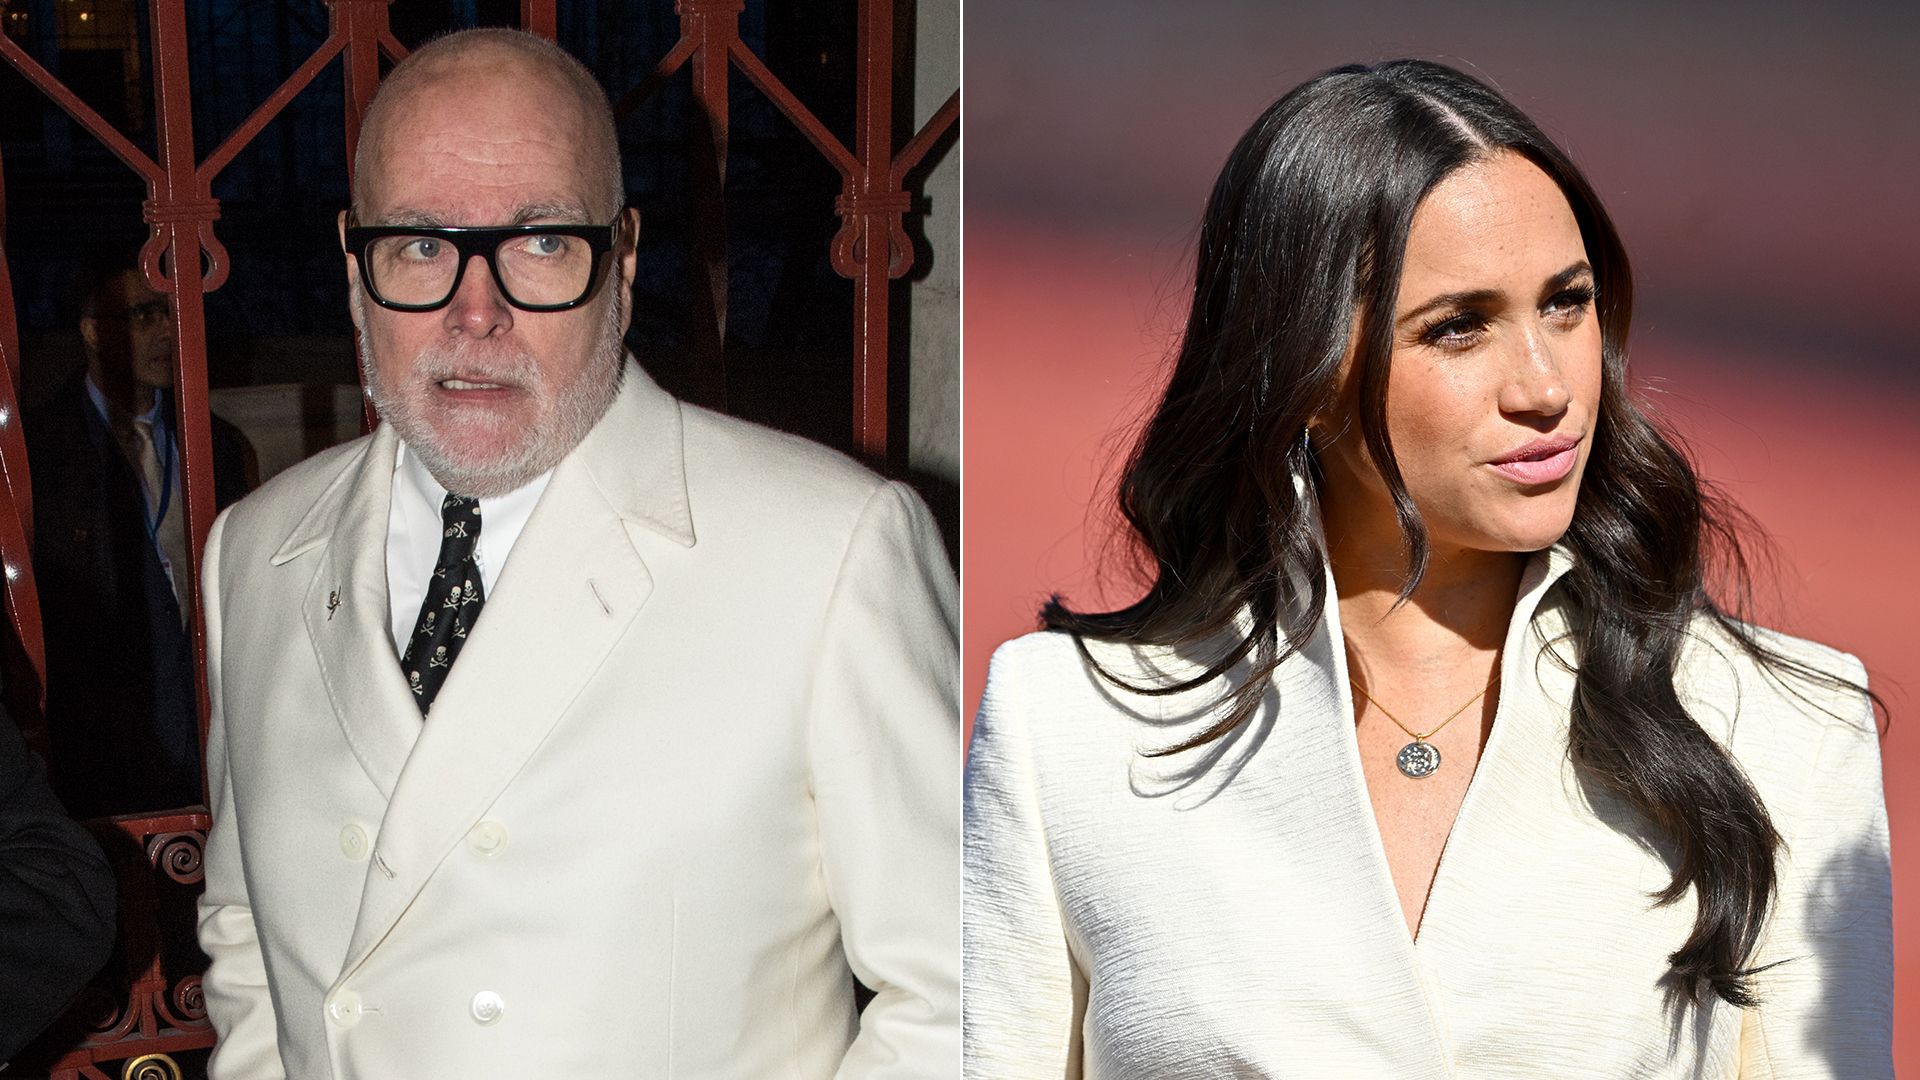 Gary Goldsmith quizzed about Meghan Markle as he admits lack of communication with niece Princess Kate